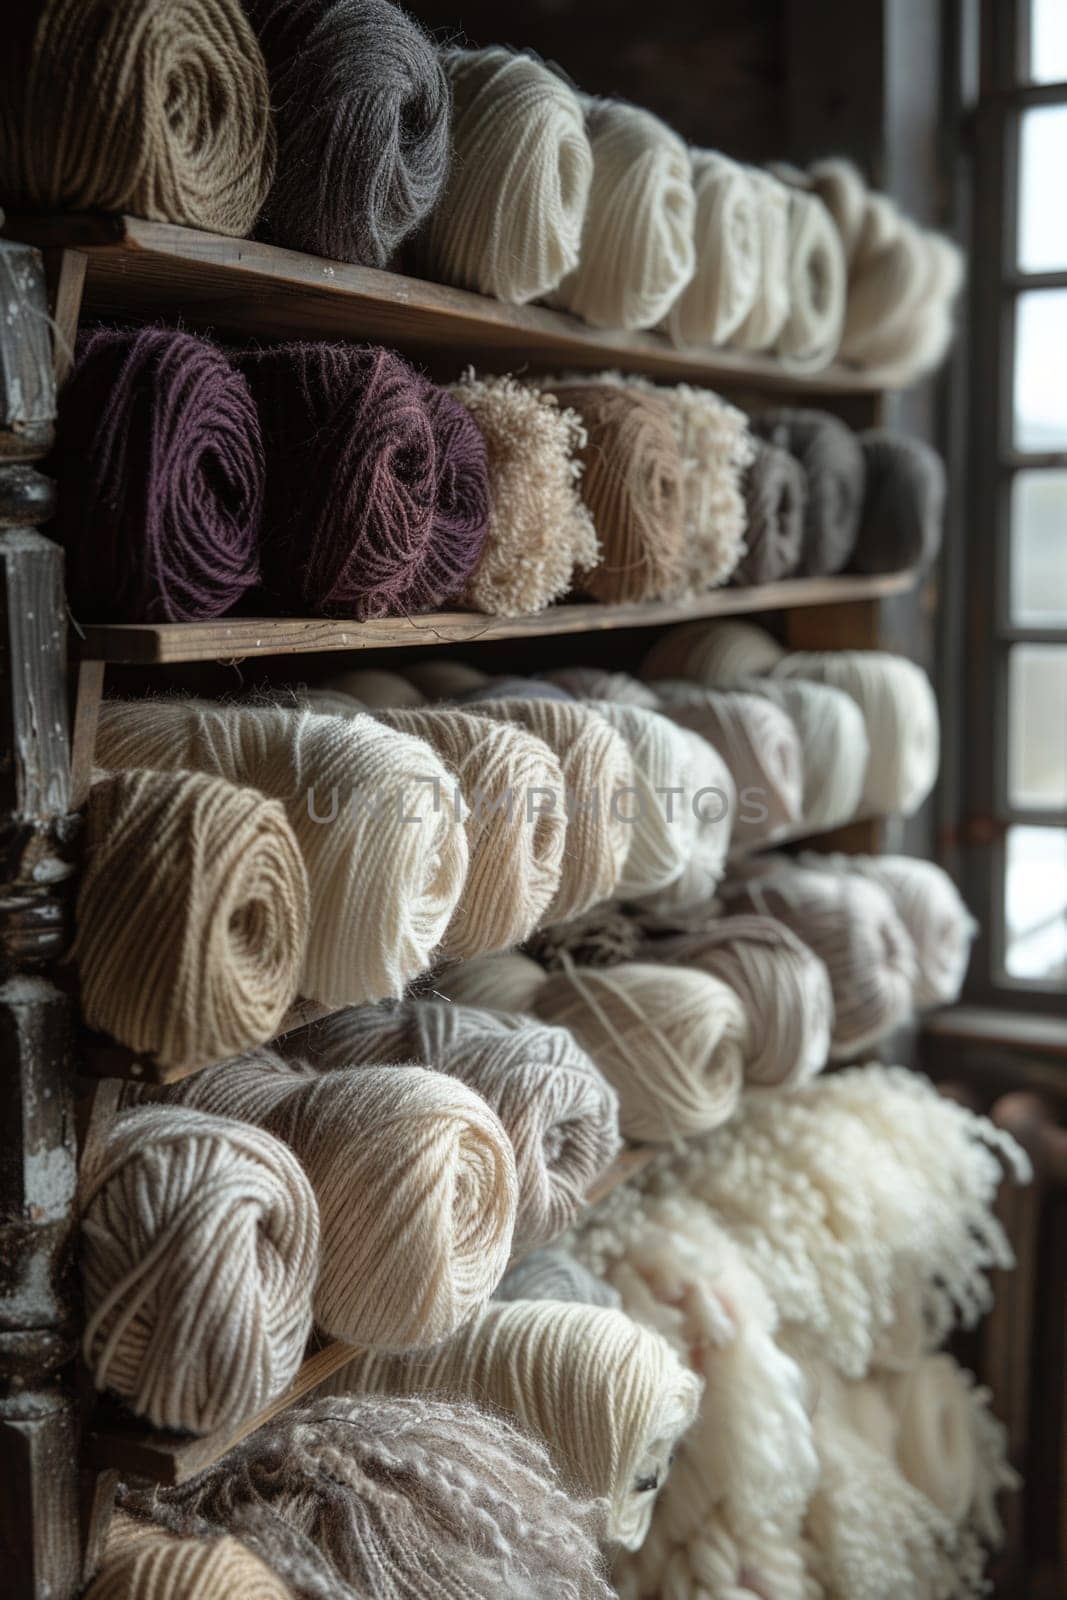 A variety of colorful yarn skeins neatly arranged on a rack in a store.